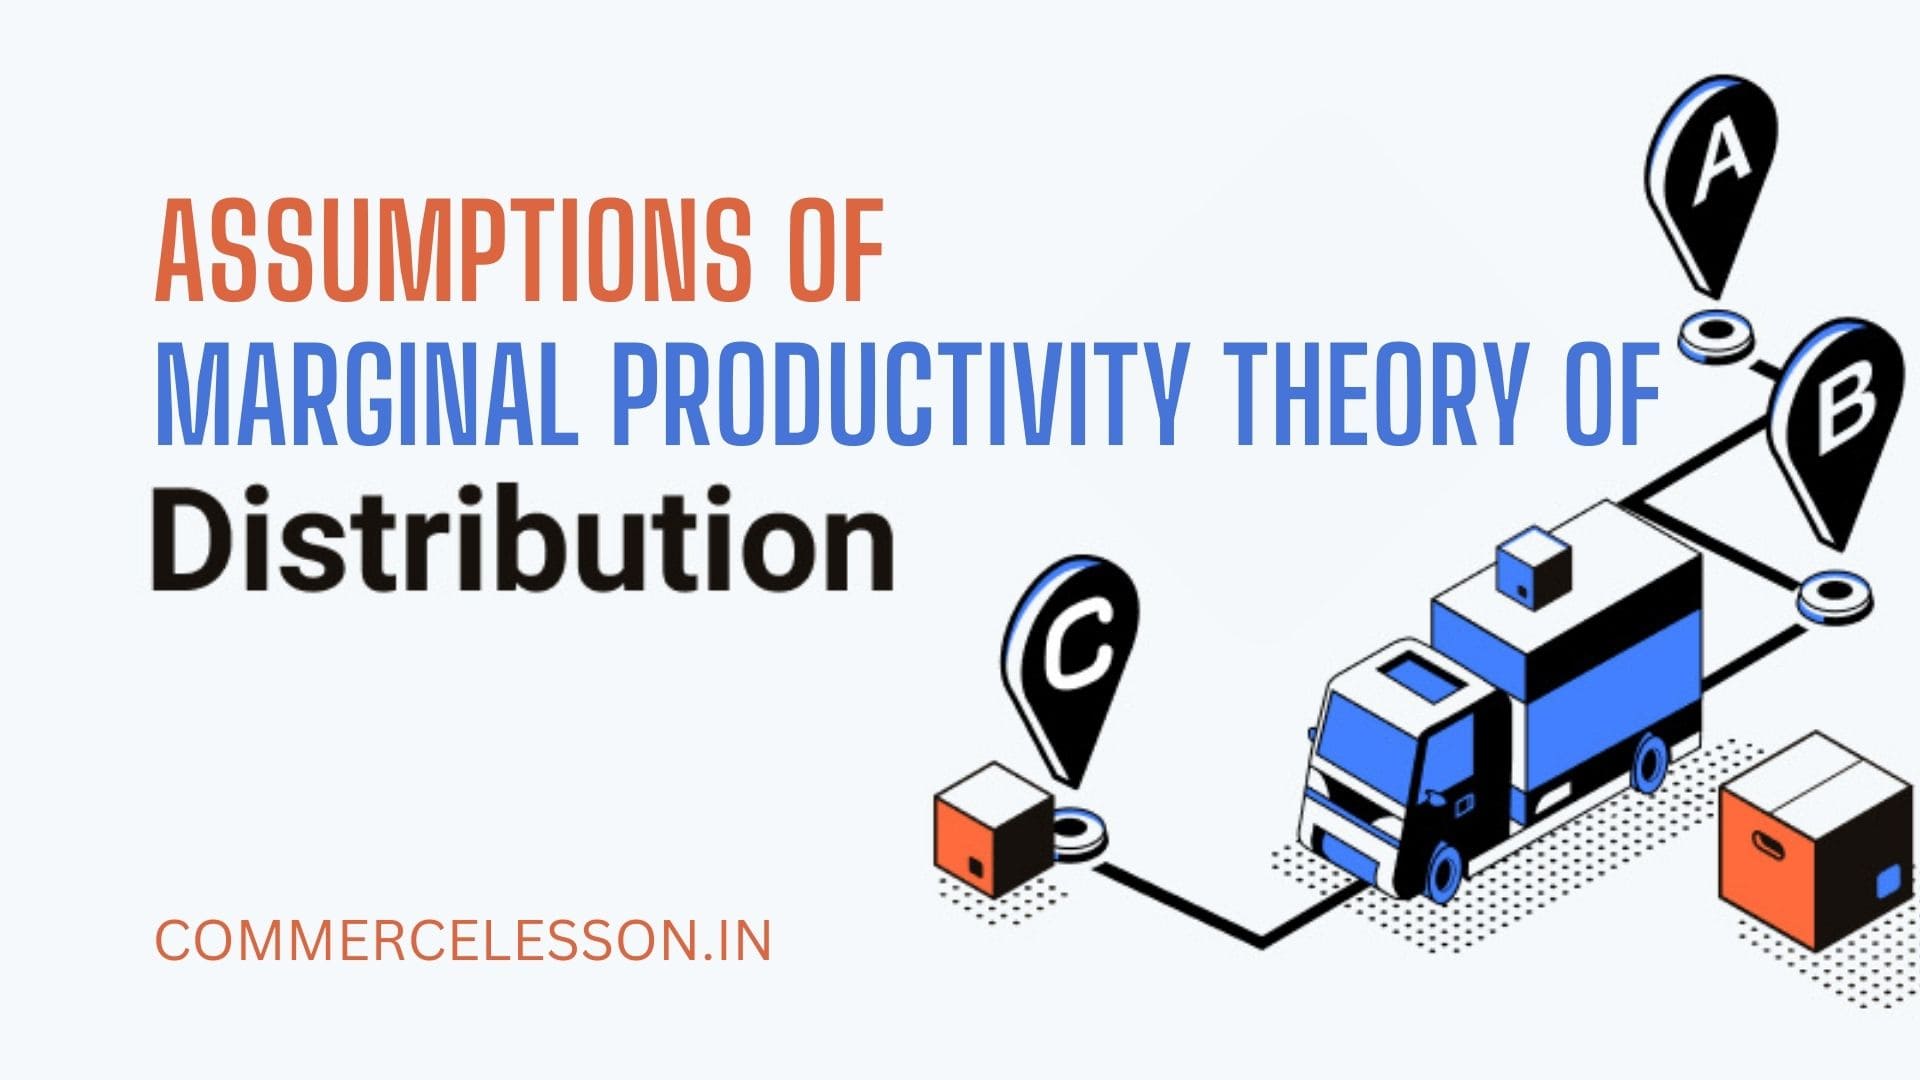 Assumptions of Marginal Productivity Theory of Distribution